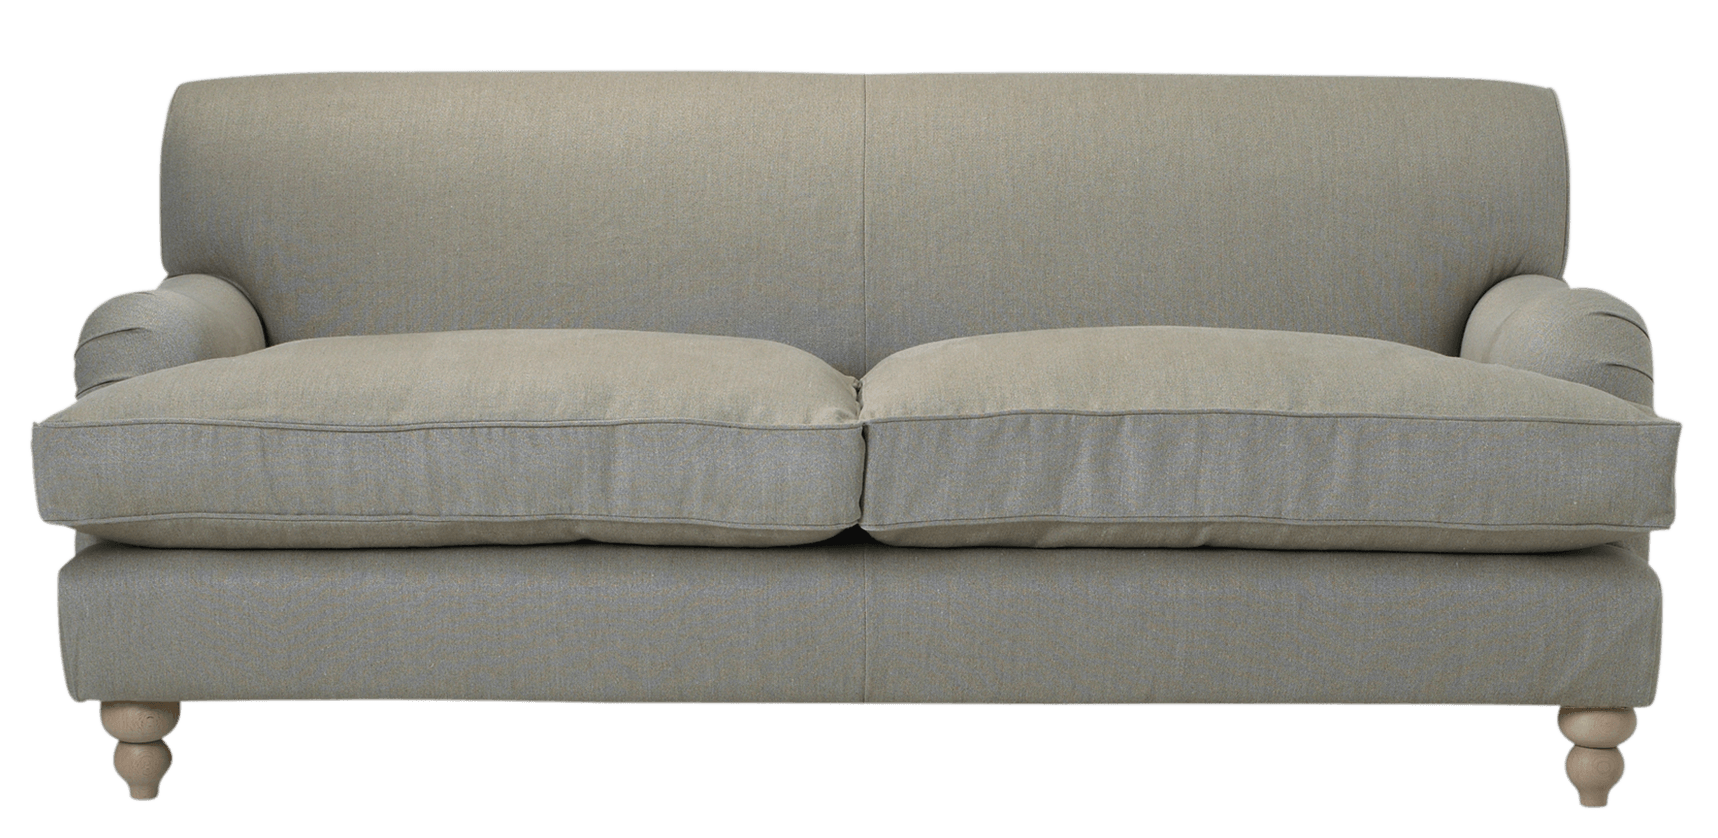 Couch Furniture Image File Formats Sofa Png